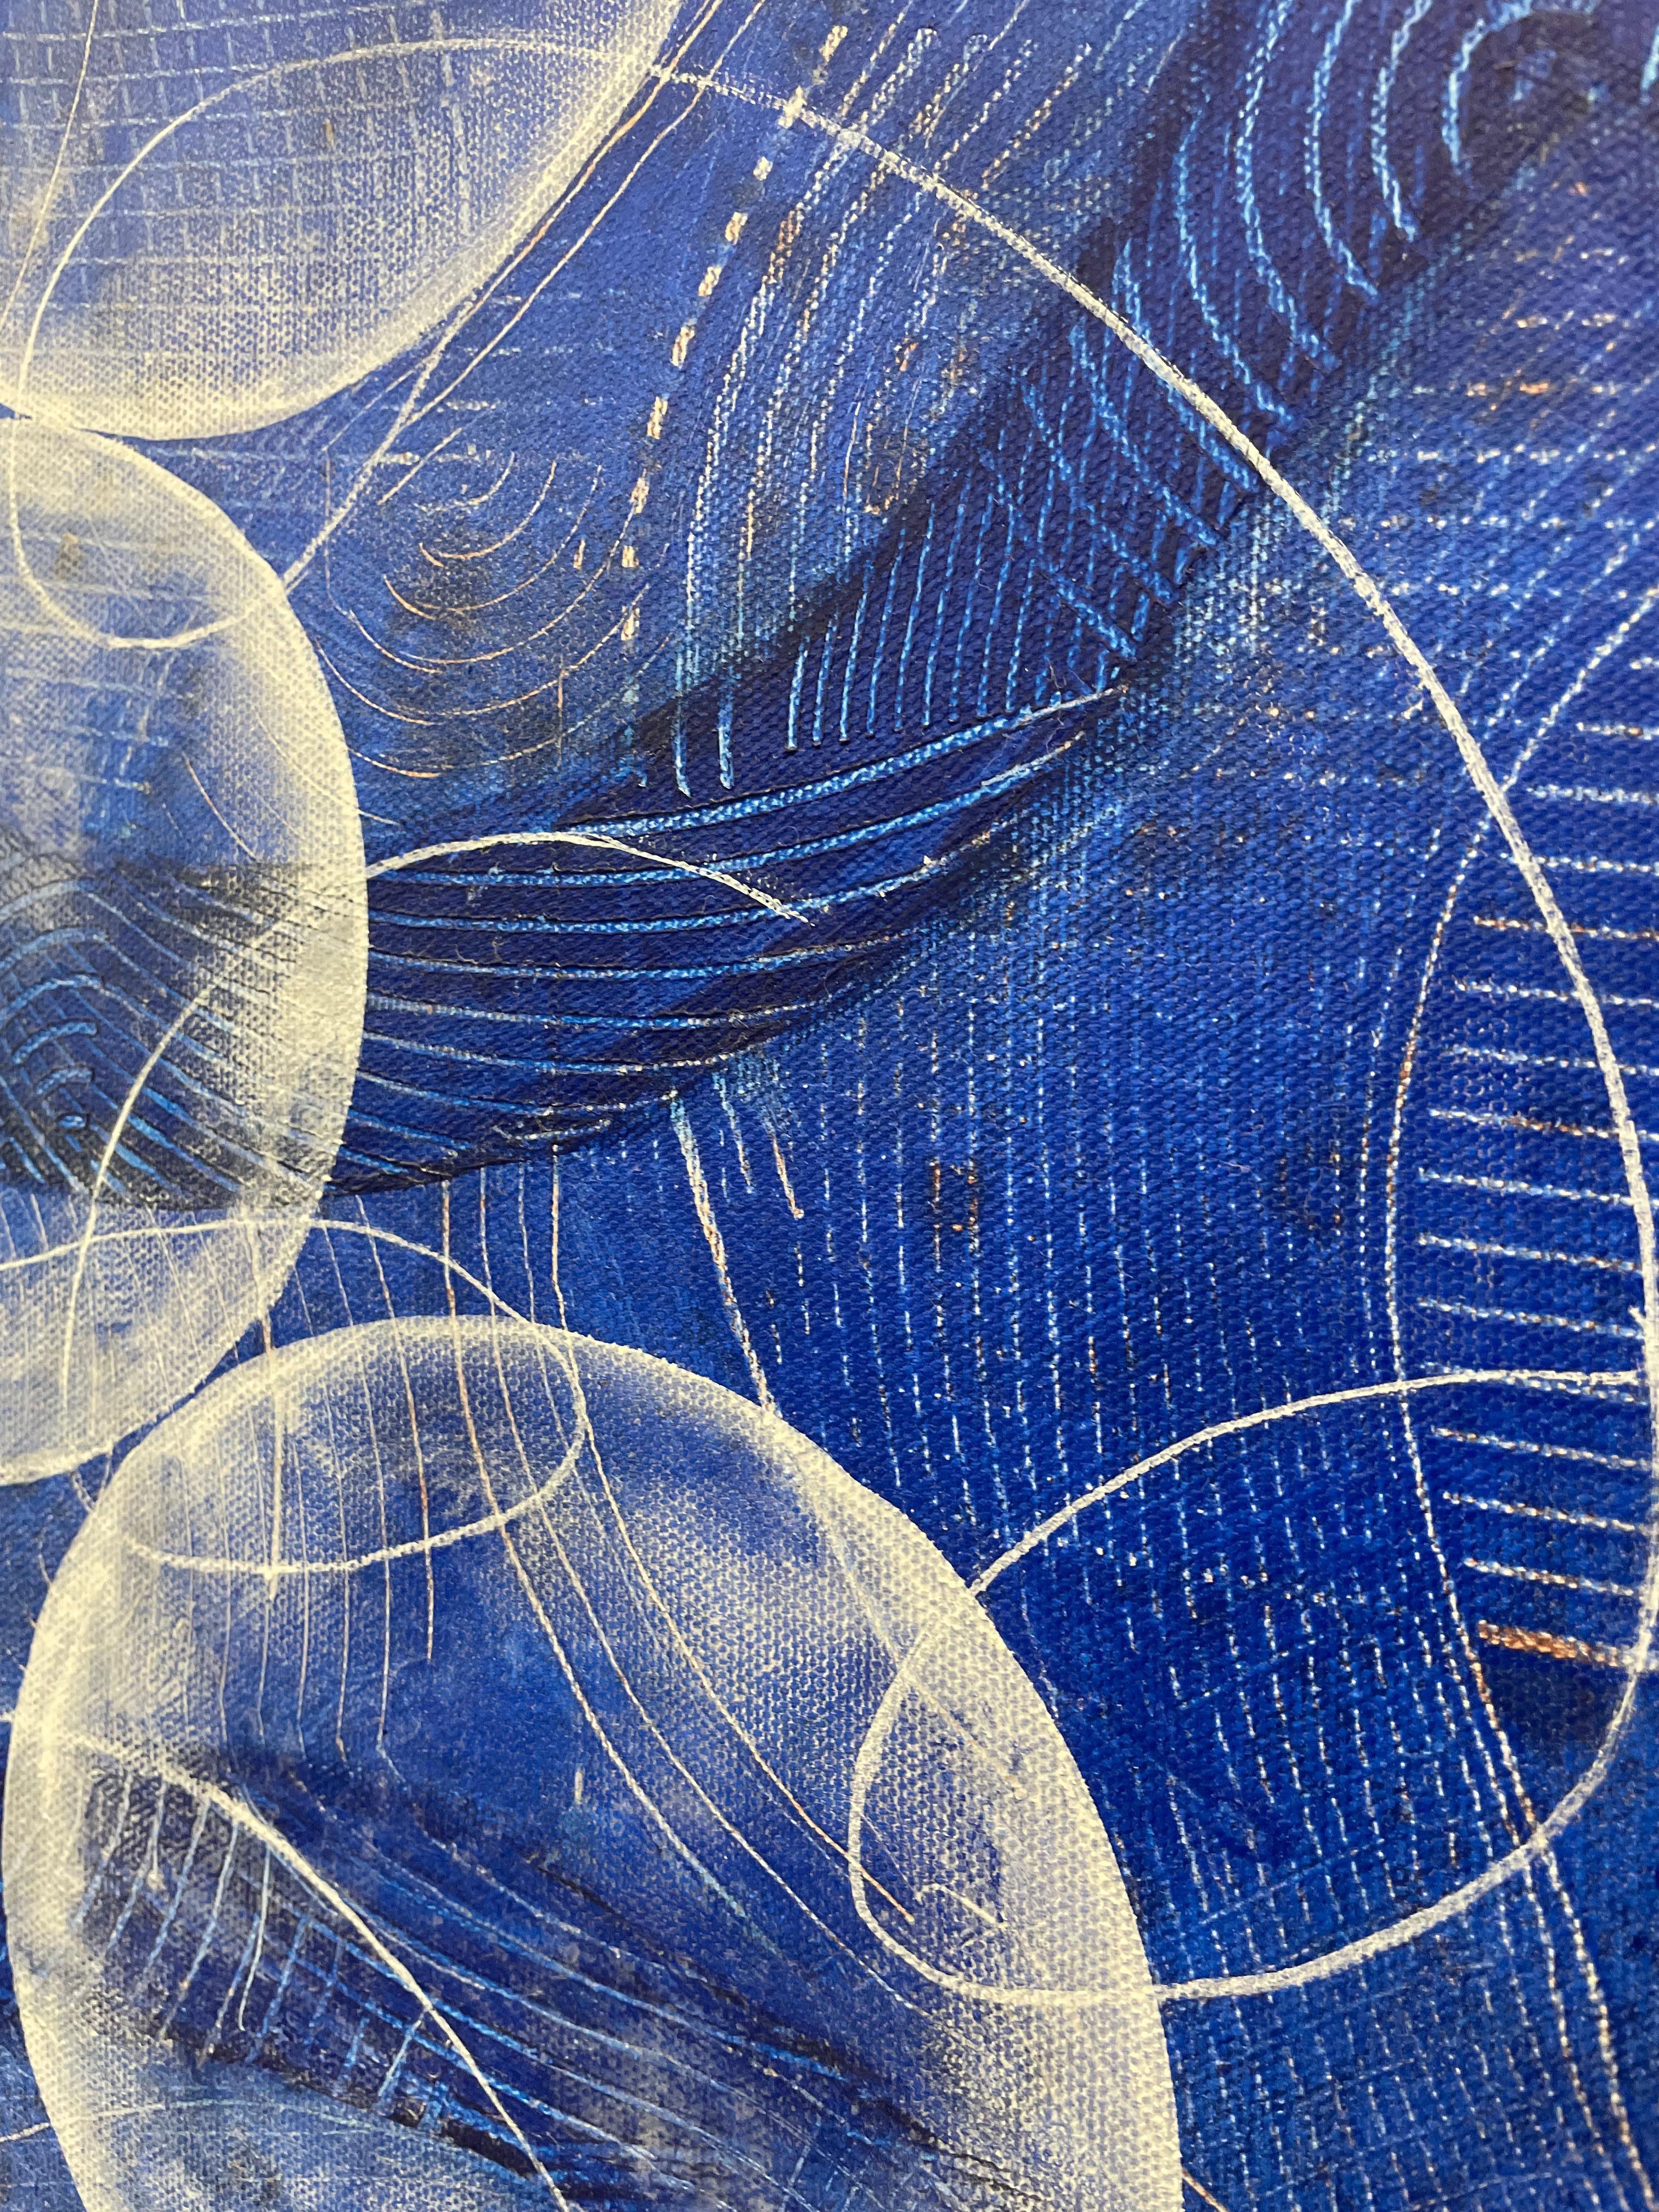 BALANCED I -  Large gestural abstract painting in blue and white  - Blue Abstract Painting by Andra Samelson